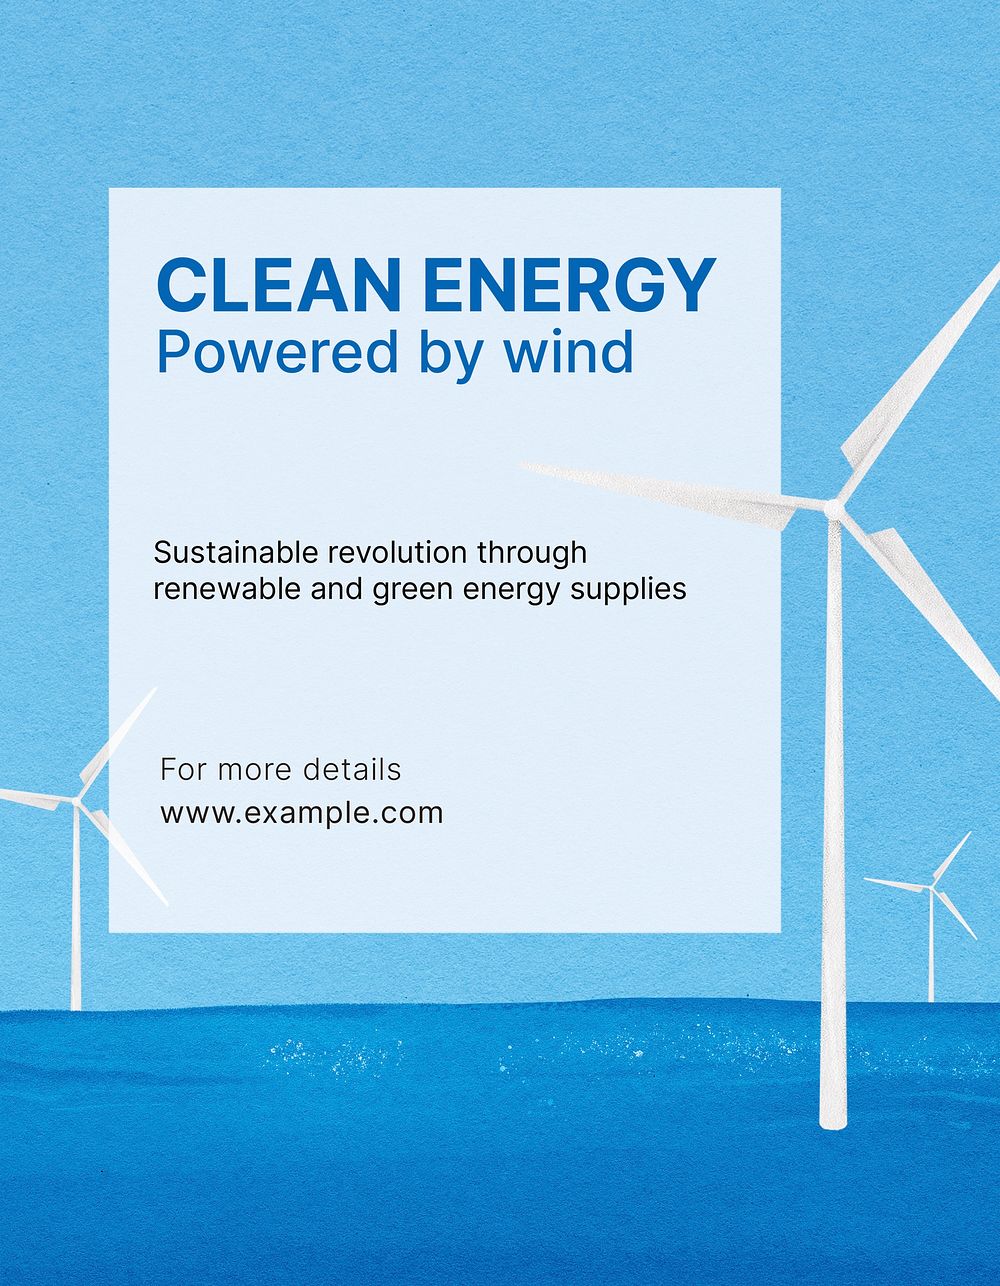 Clean energy flyer template, offshore wind farm psd